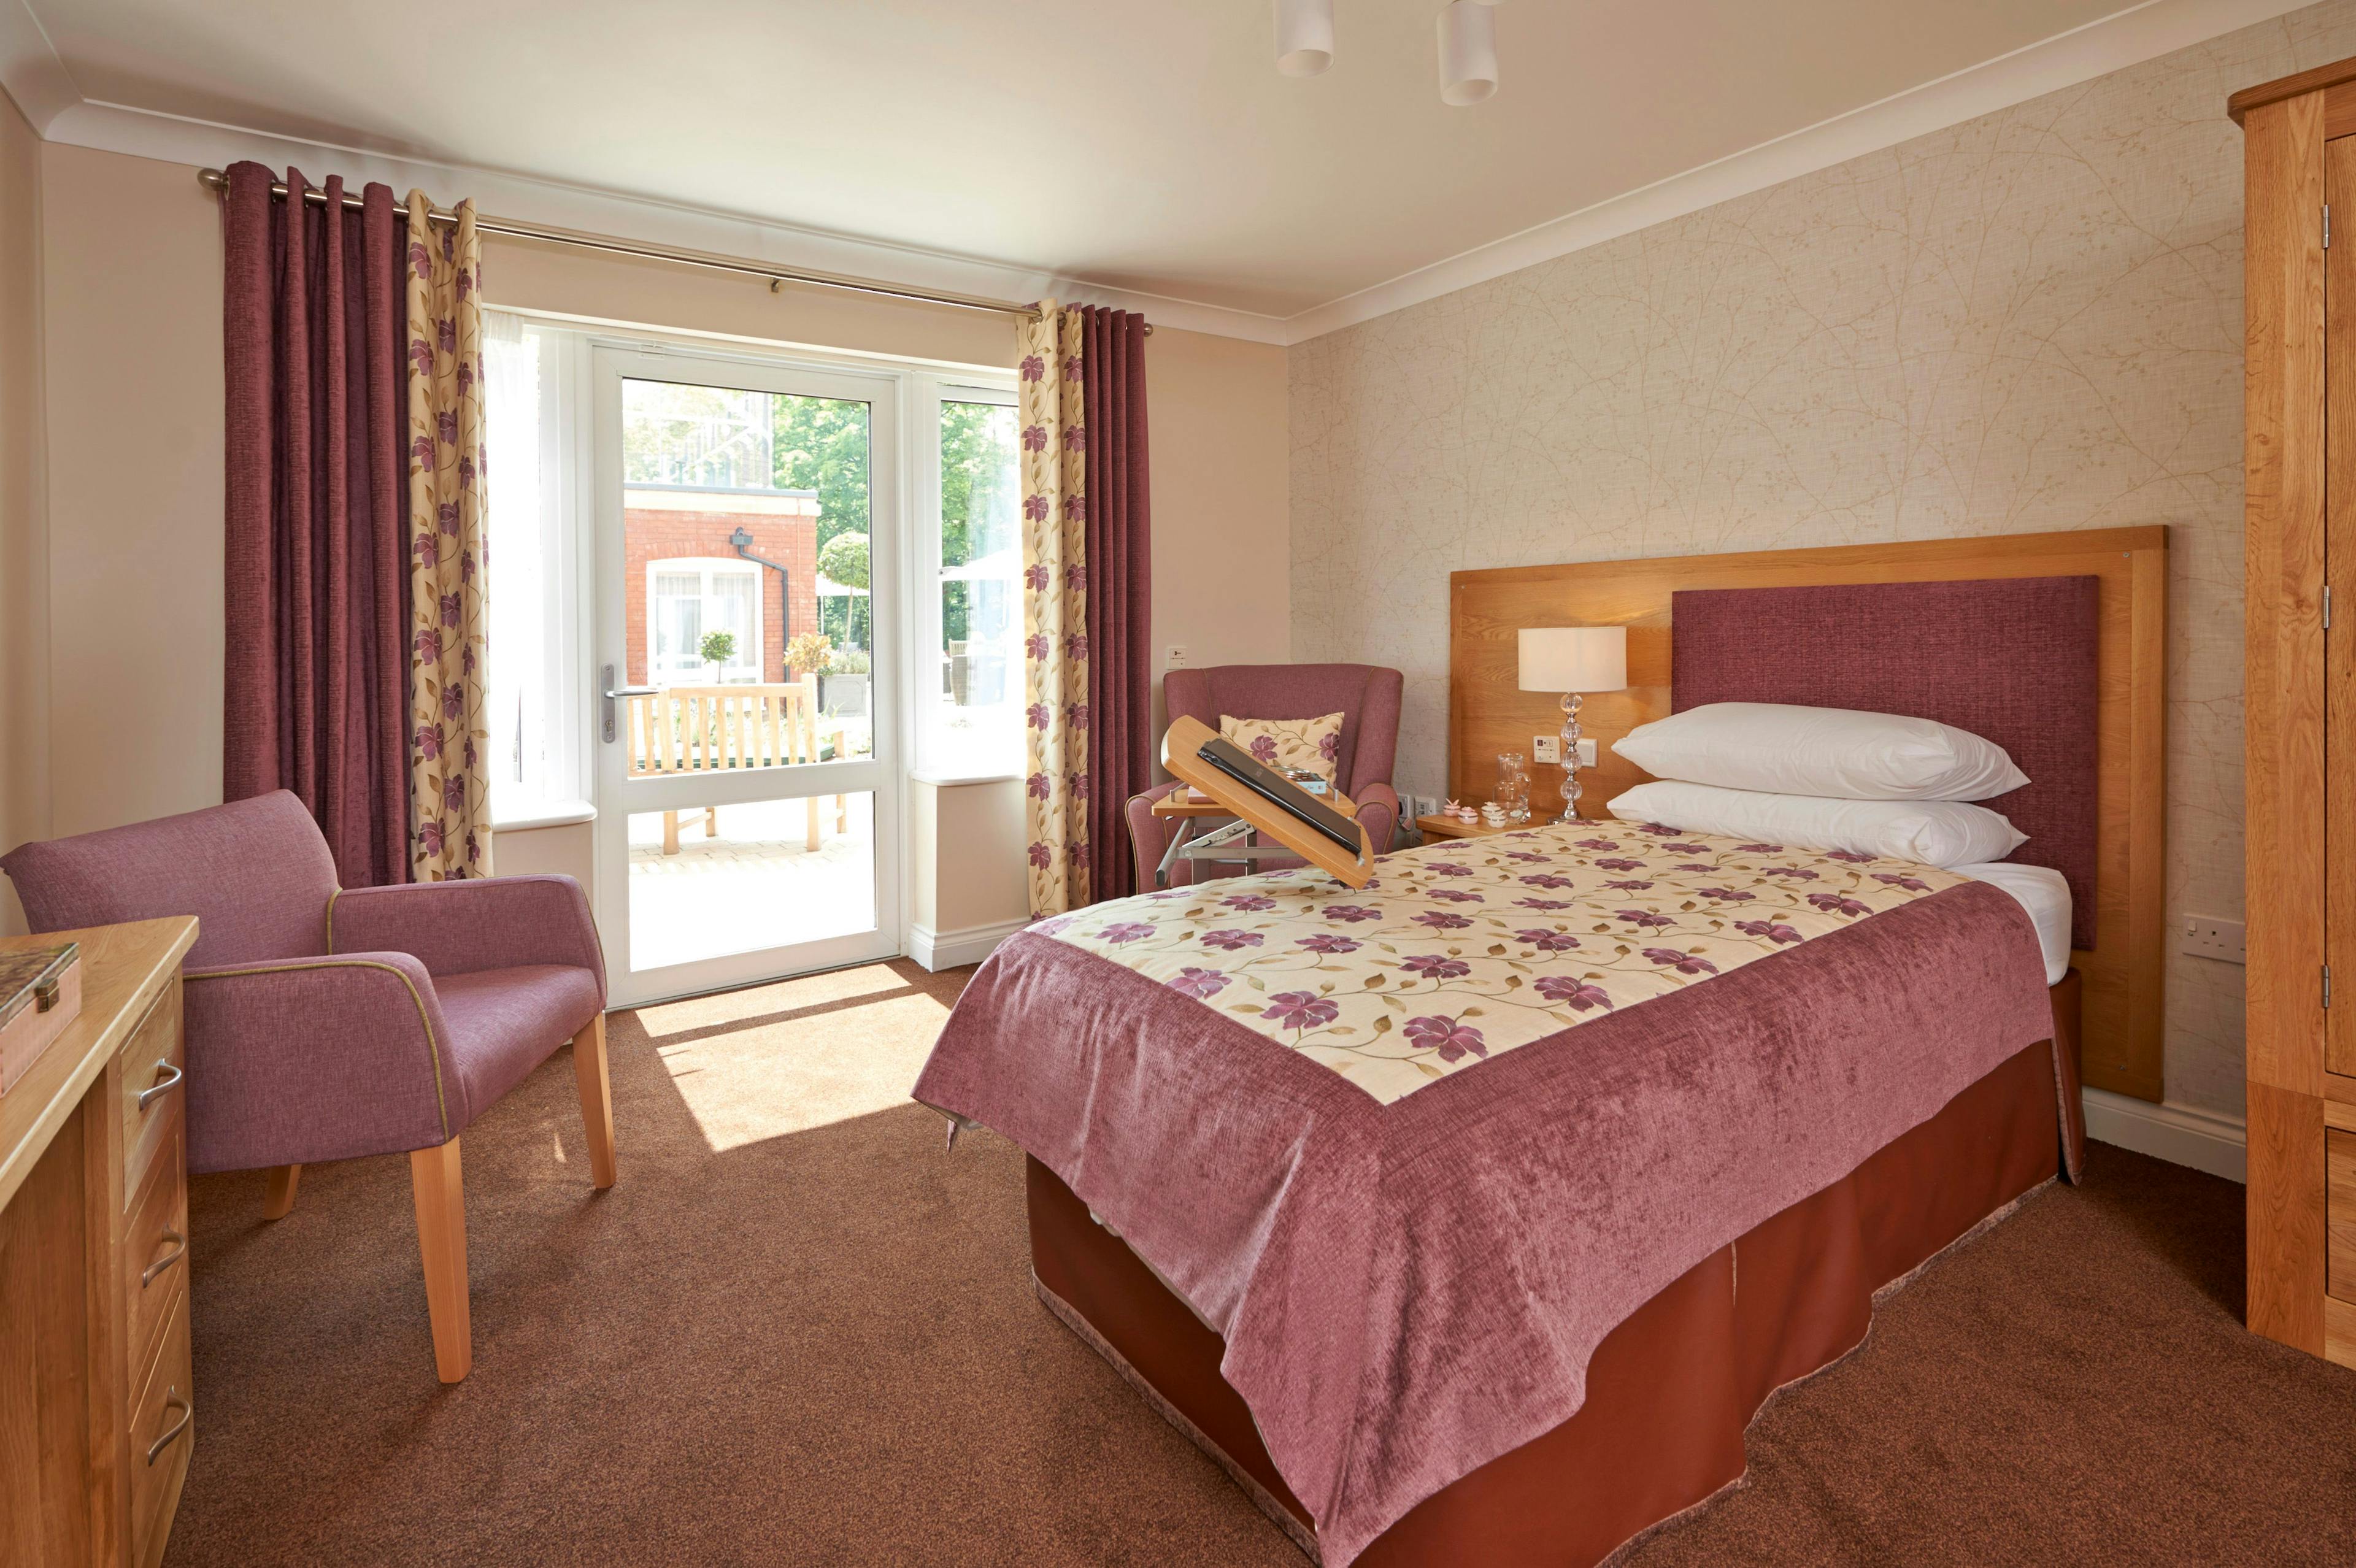 Porthaven Care Homes - Lincroft Meadow care home 5